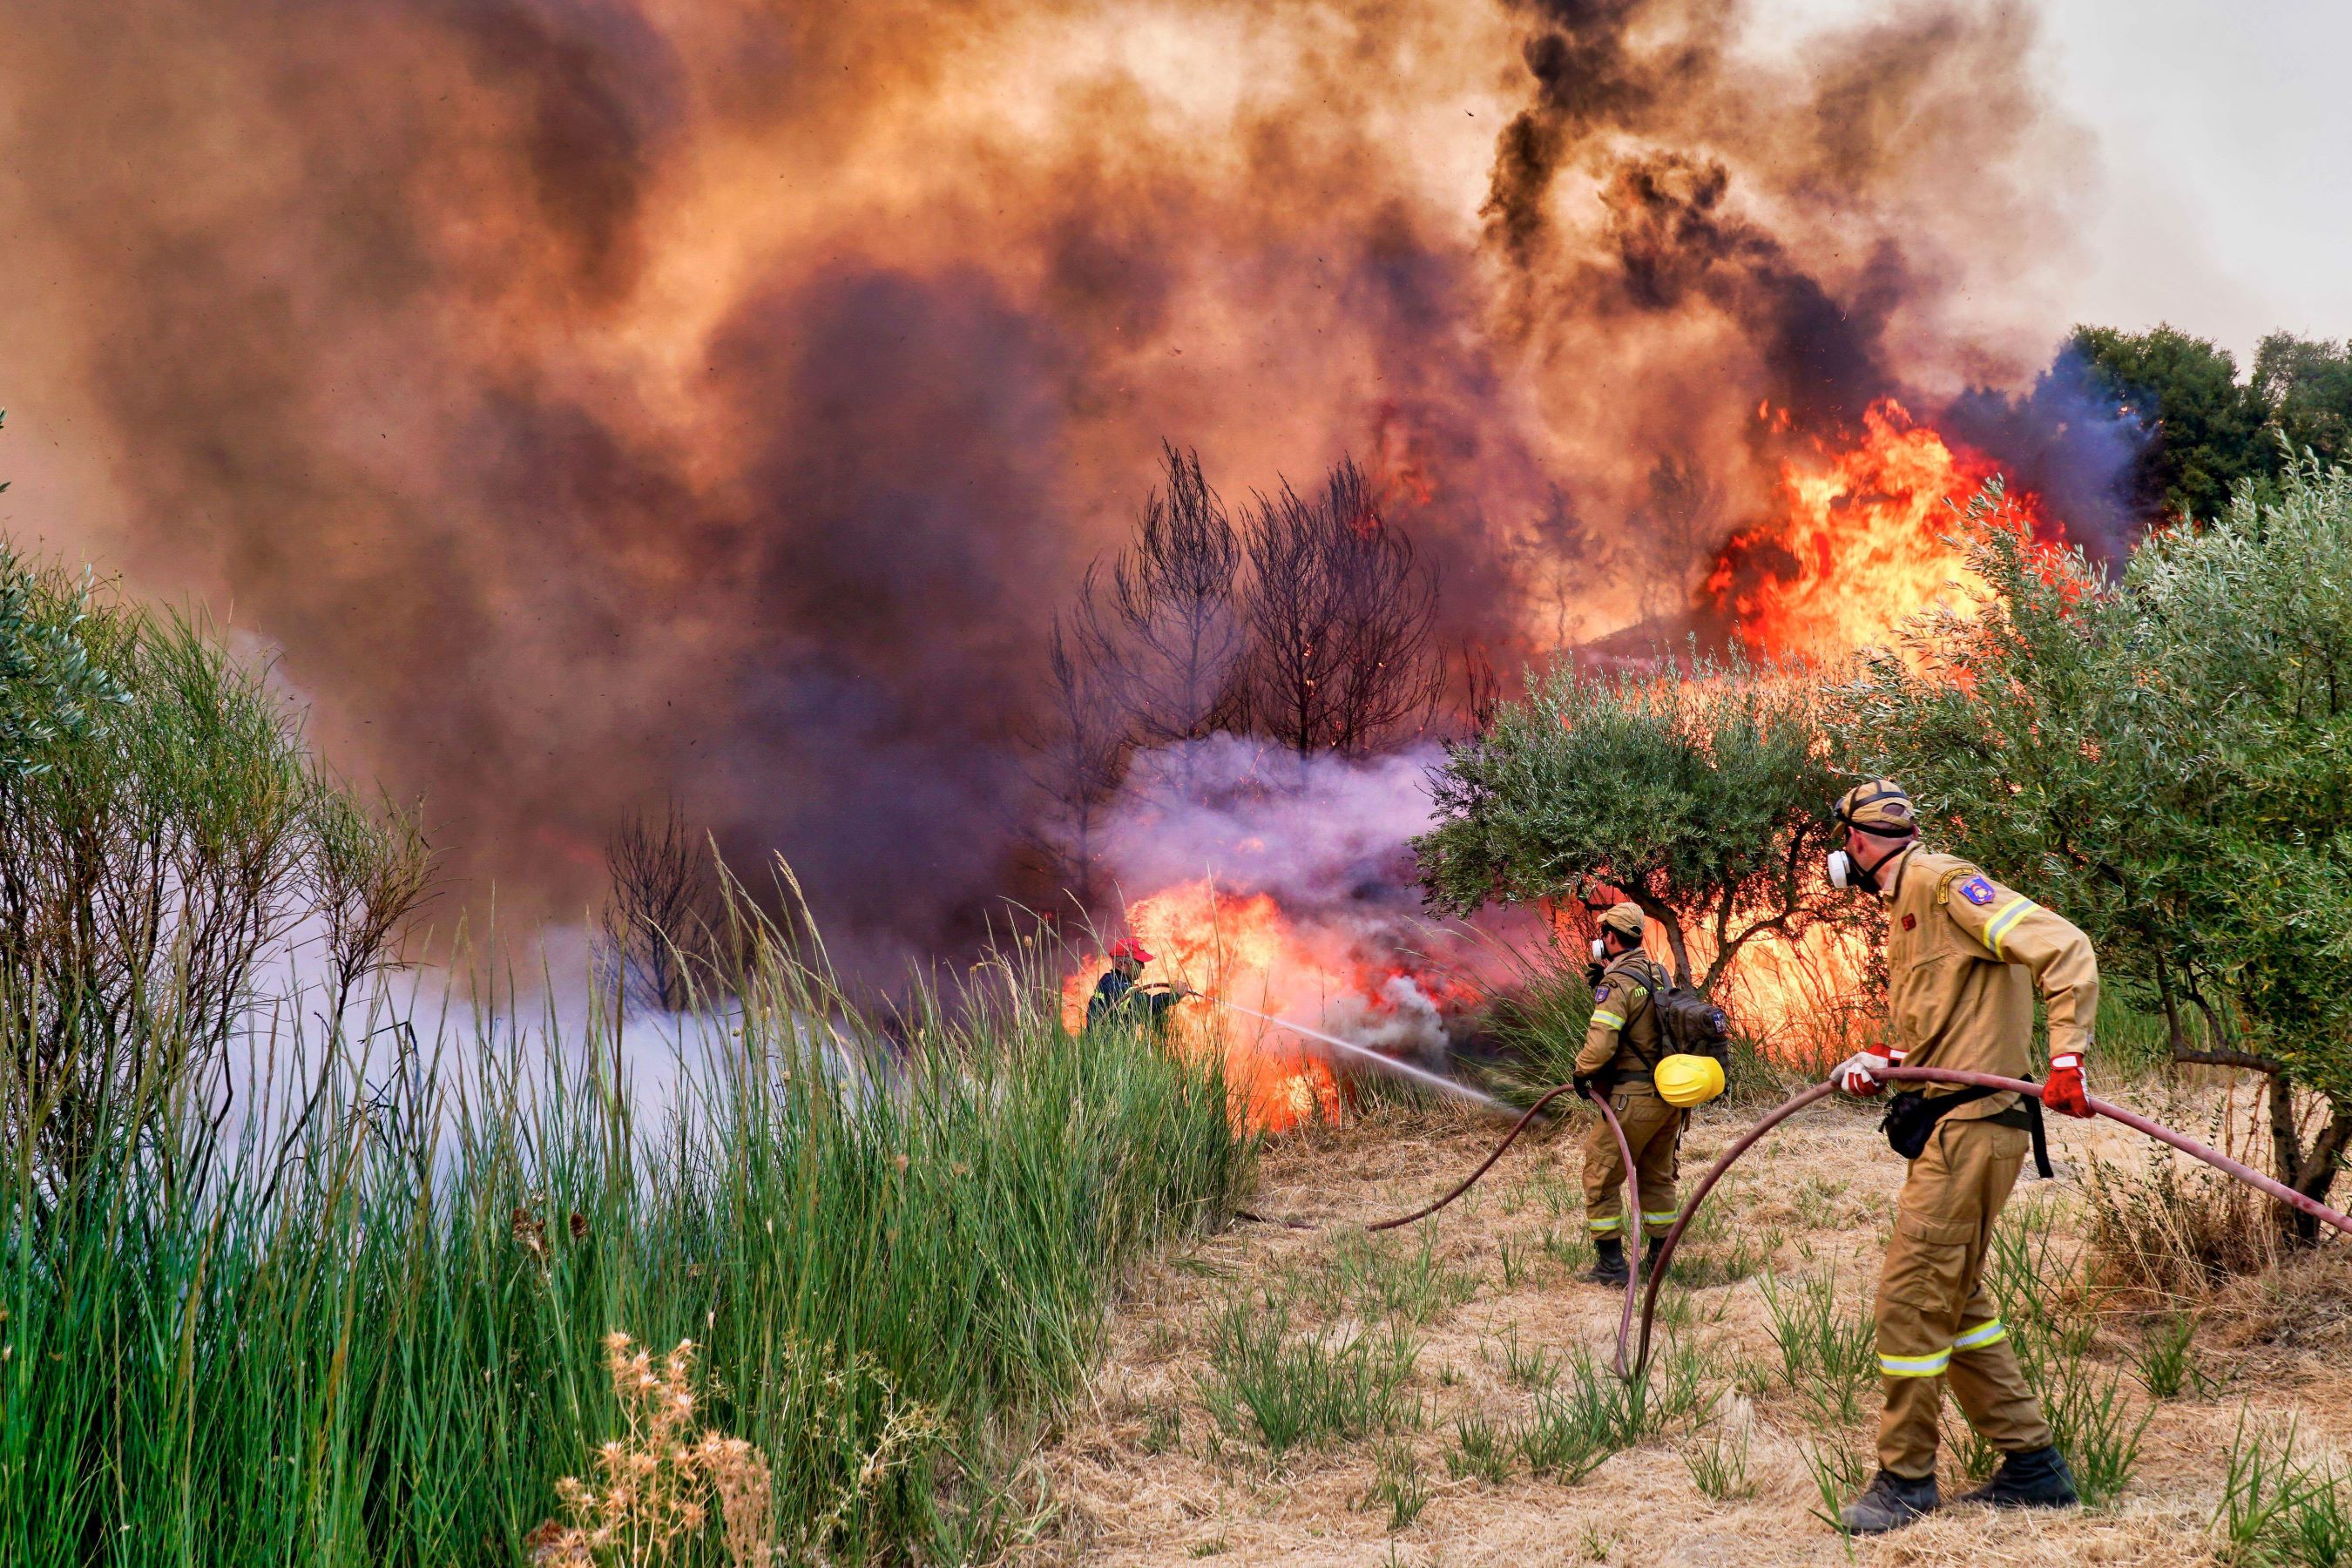 Photo of green vegetation on fire with two firefighters trying to extinguish it with water